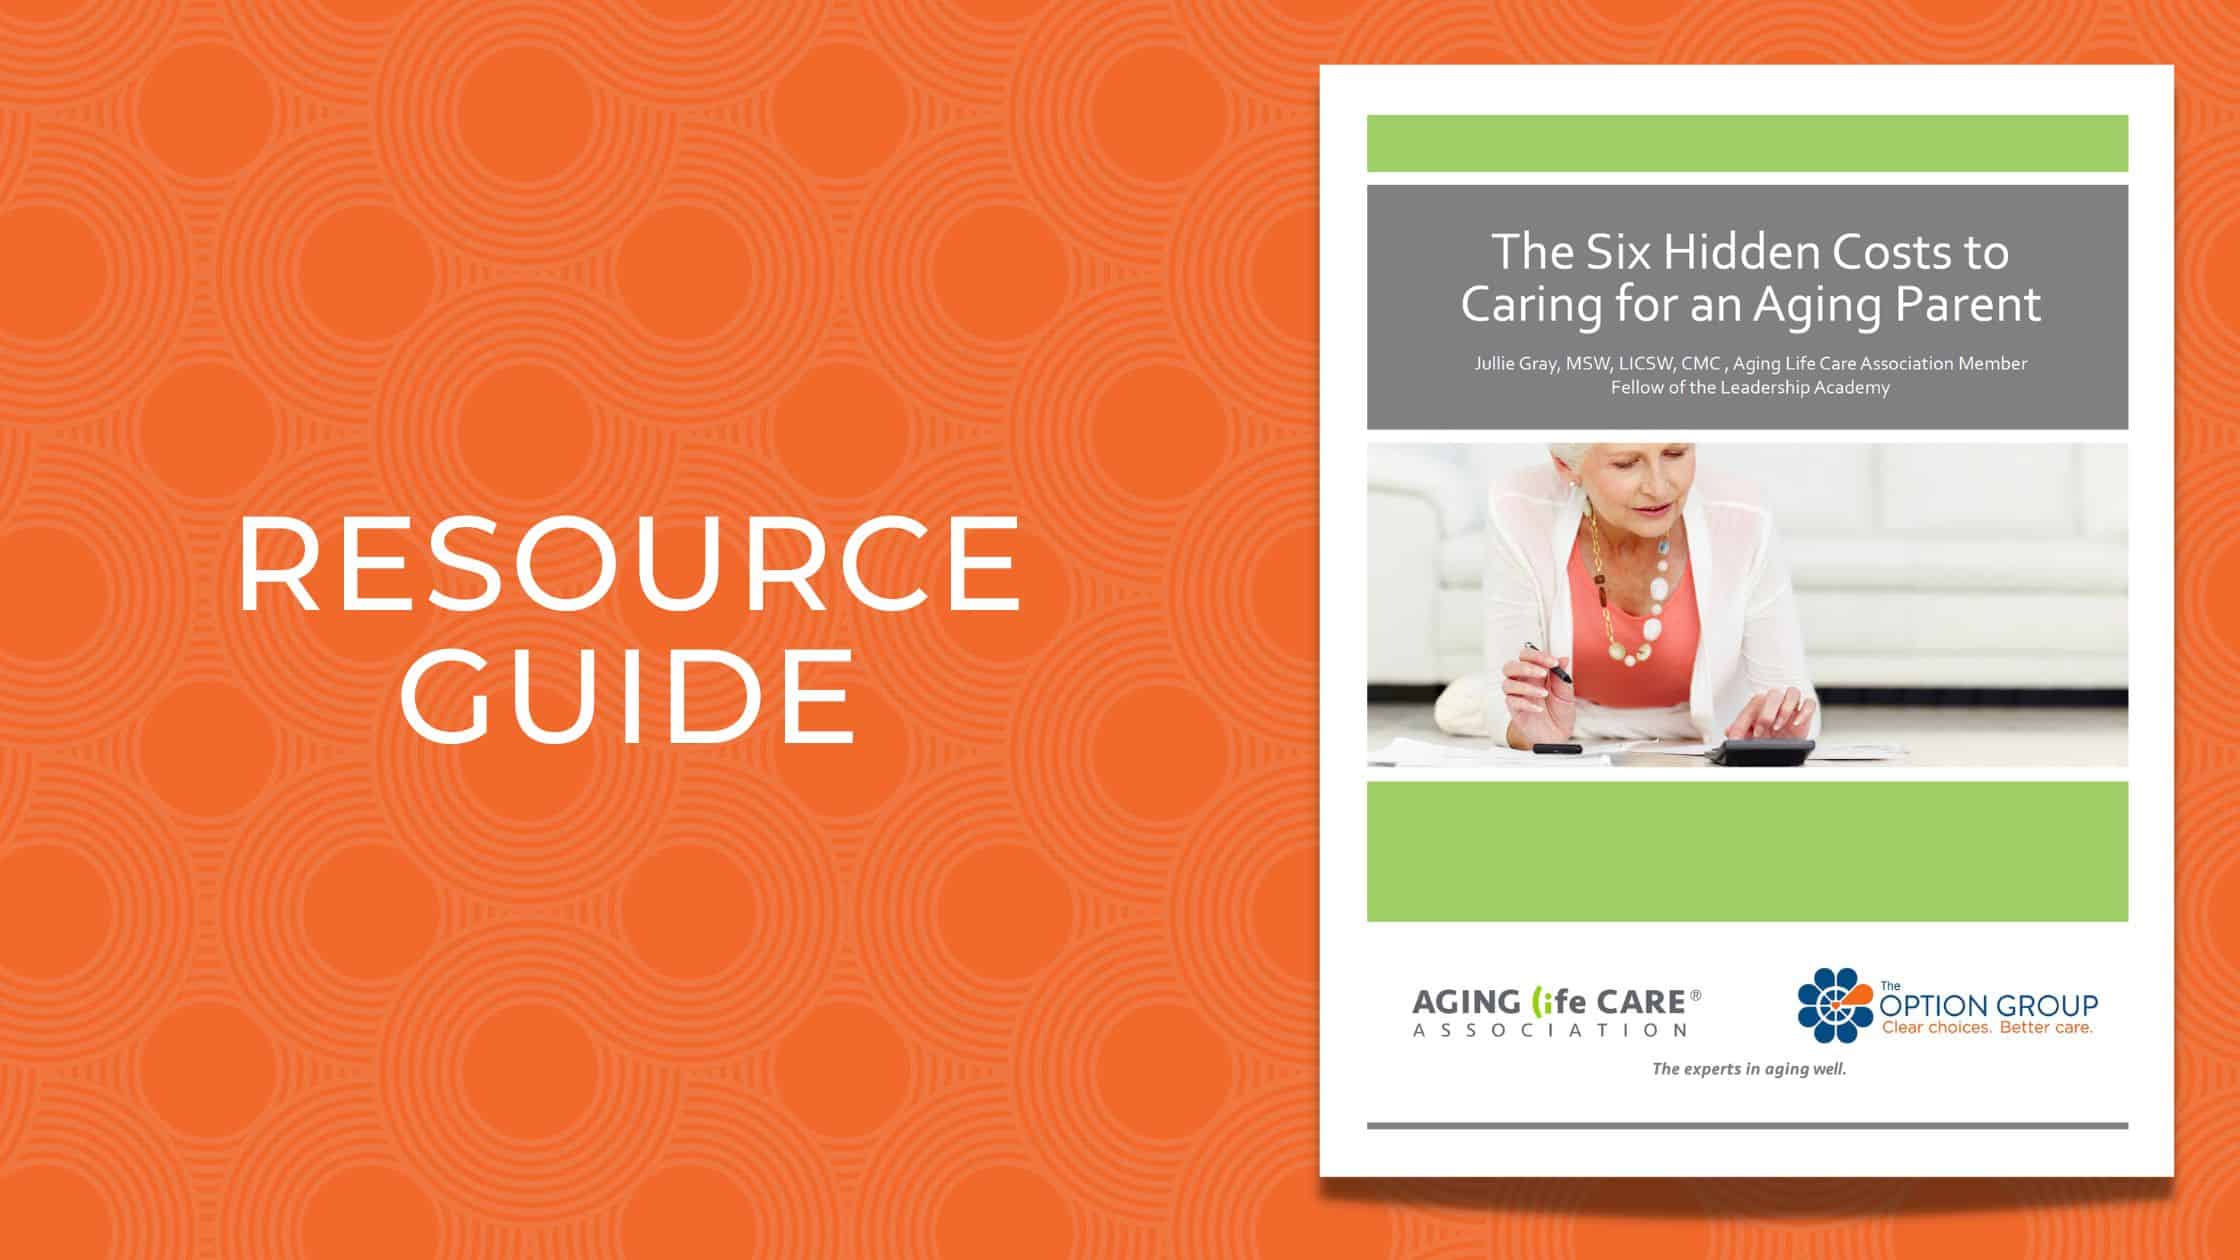 Resource Guide - Six Hidden Costs to Caring for Aging Parent